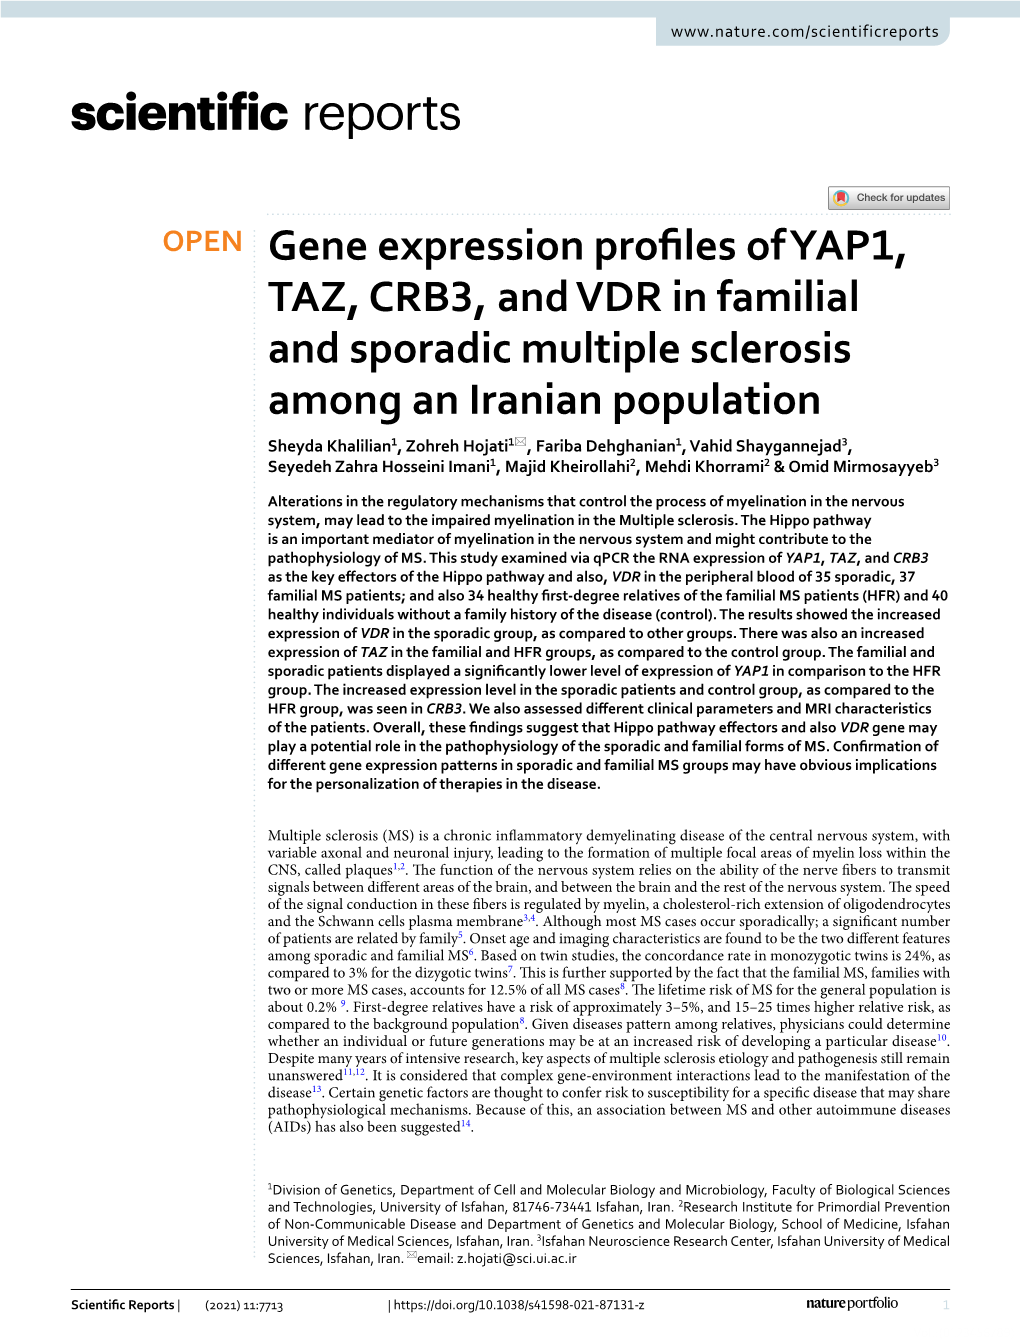 Gene Expression Profiles of YAP1, TAZ, CRB3, and VDR in Familial